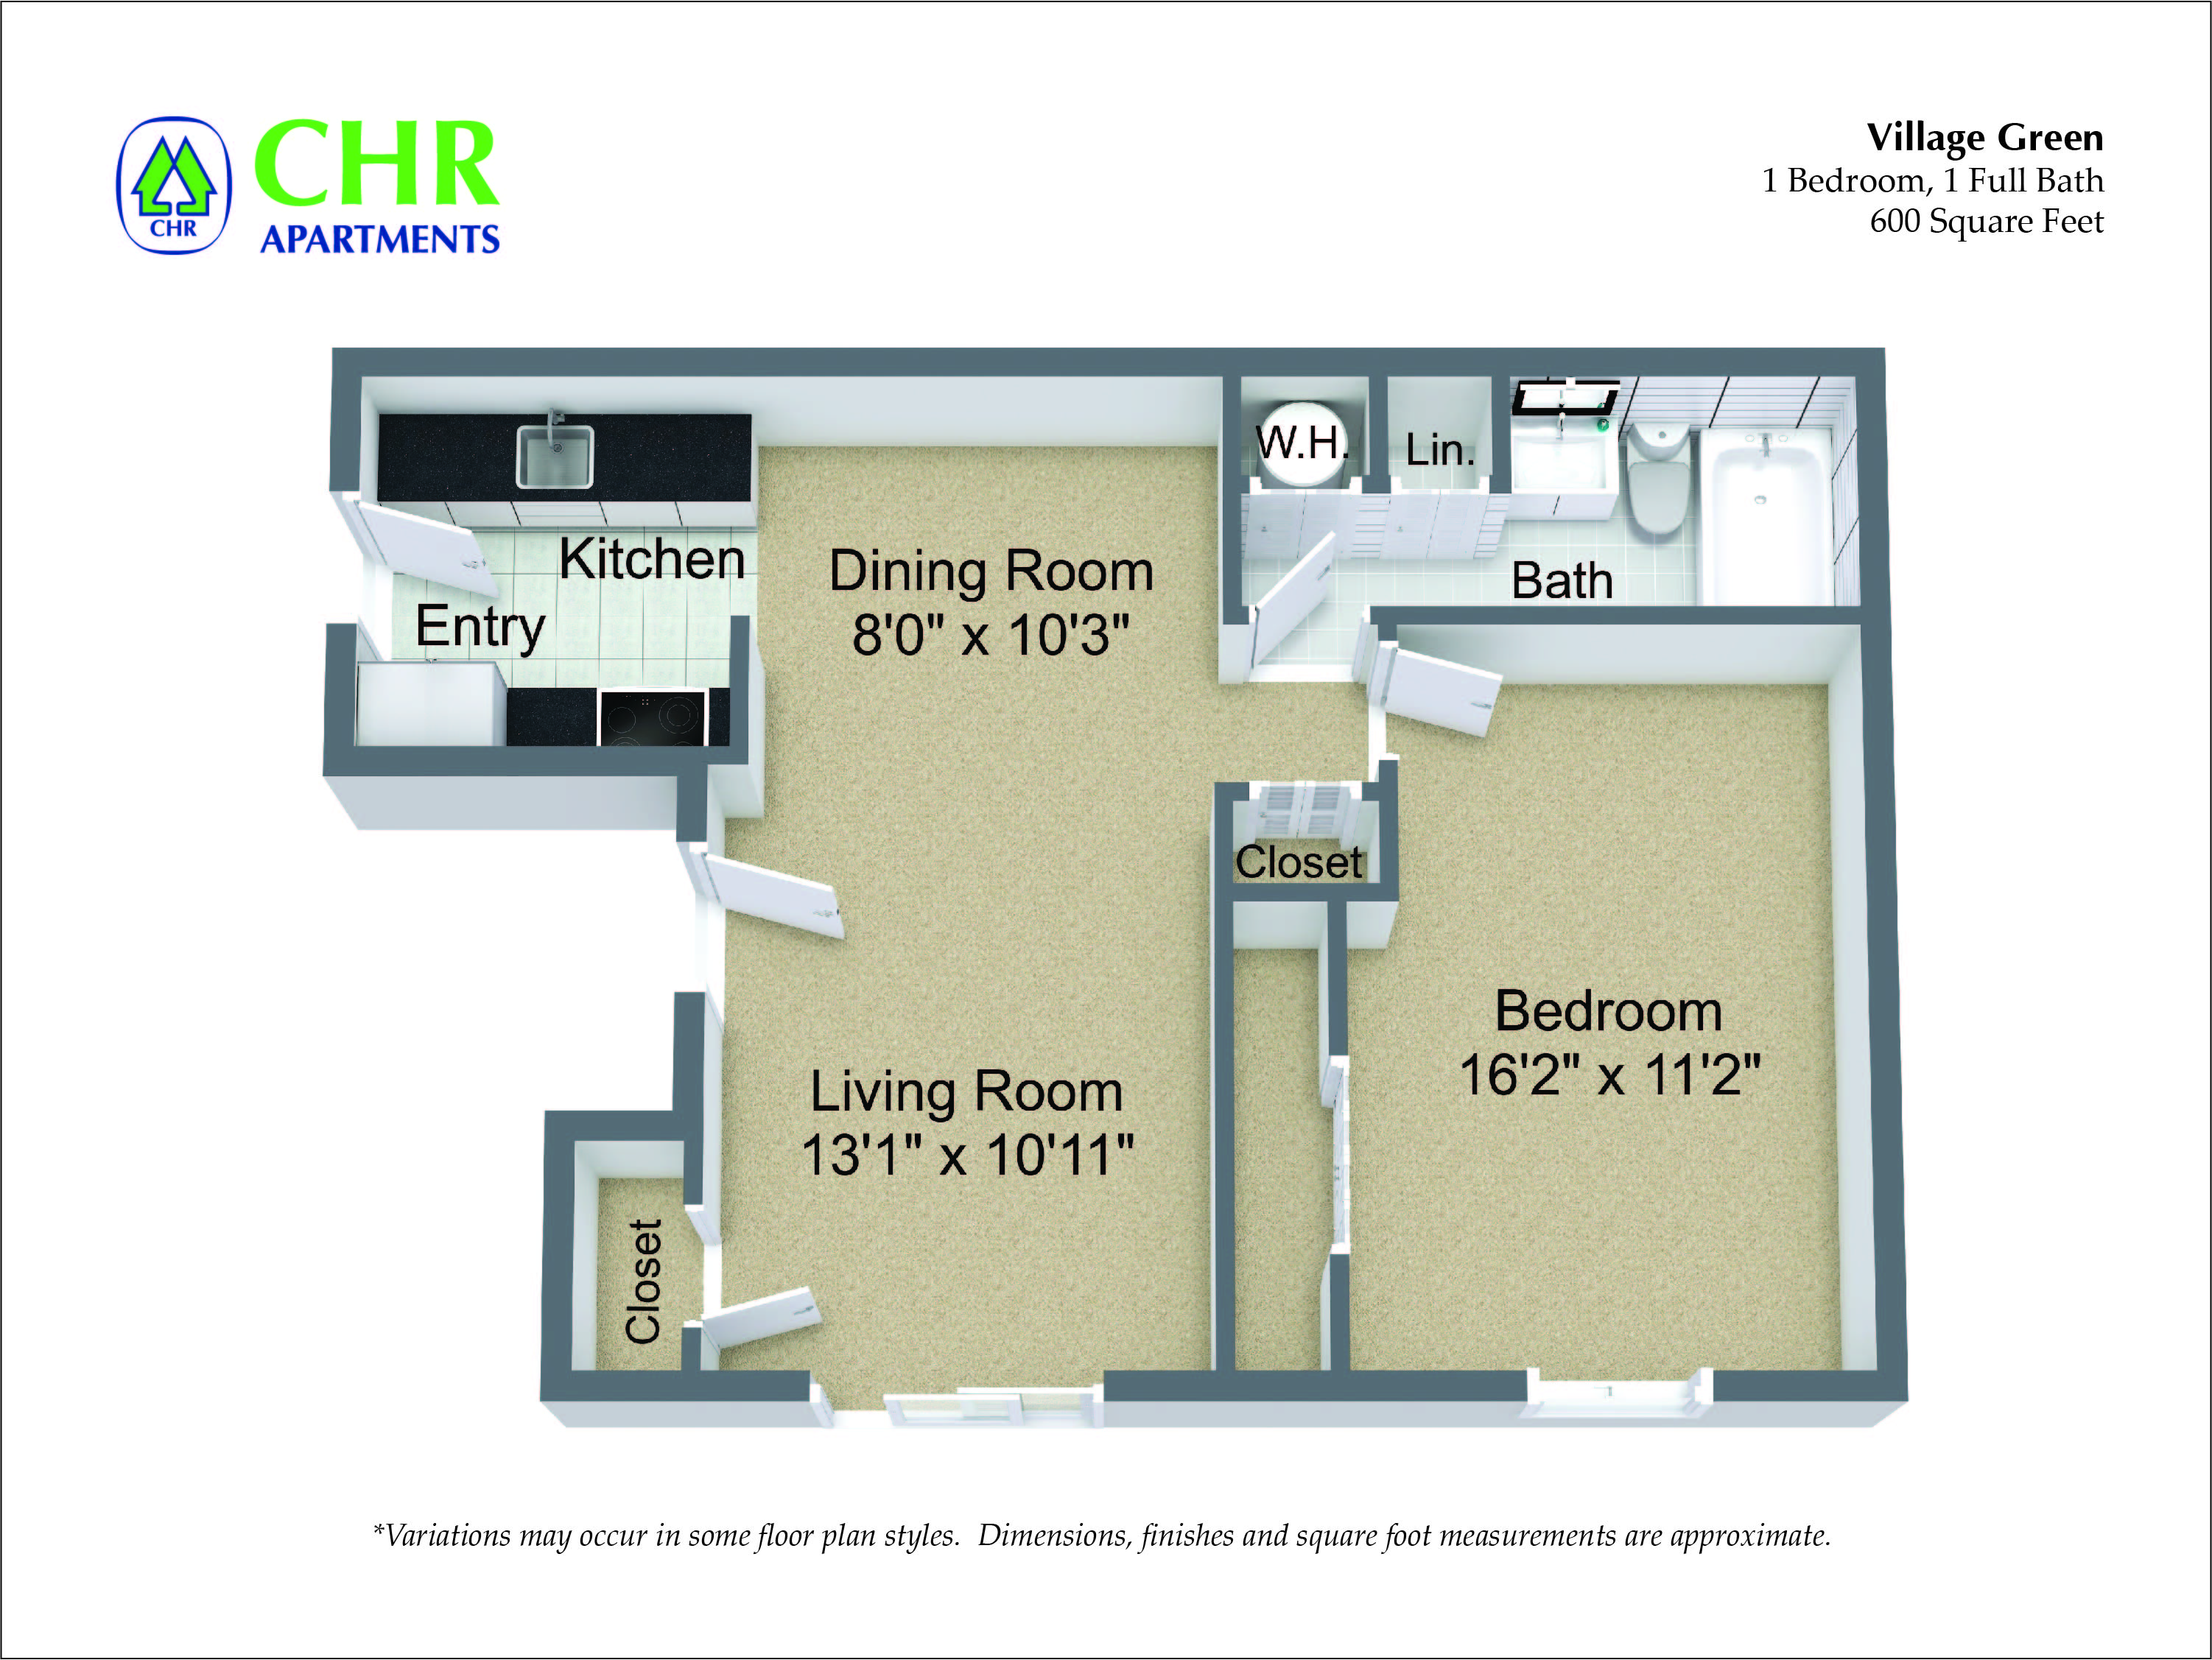 Click to view 1 Bedroom with Dining Area floor plan gallery